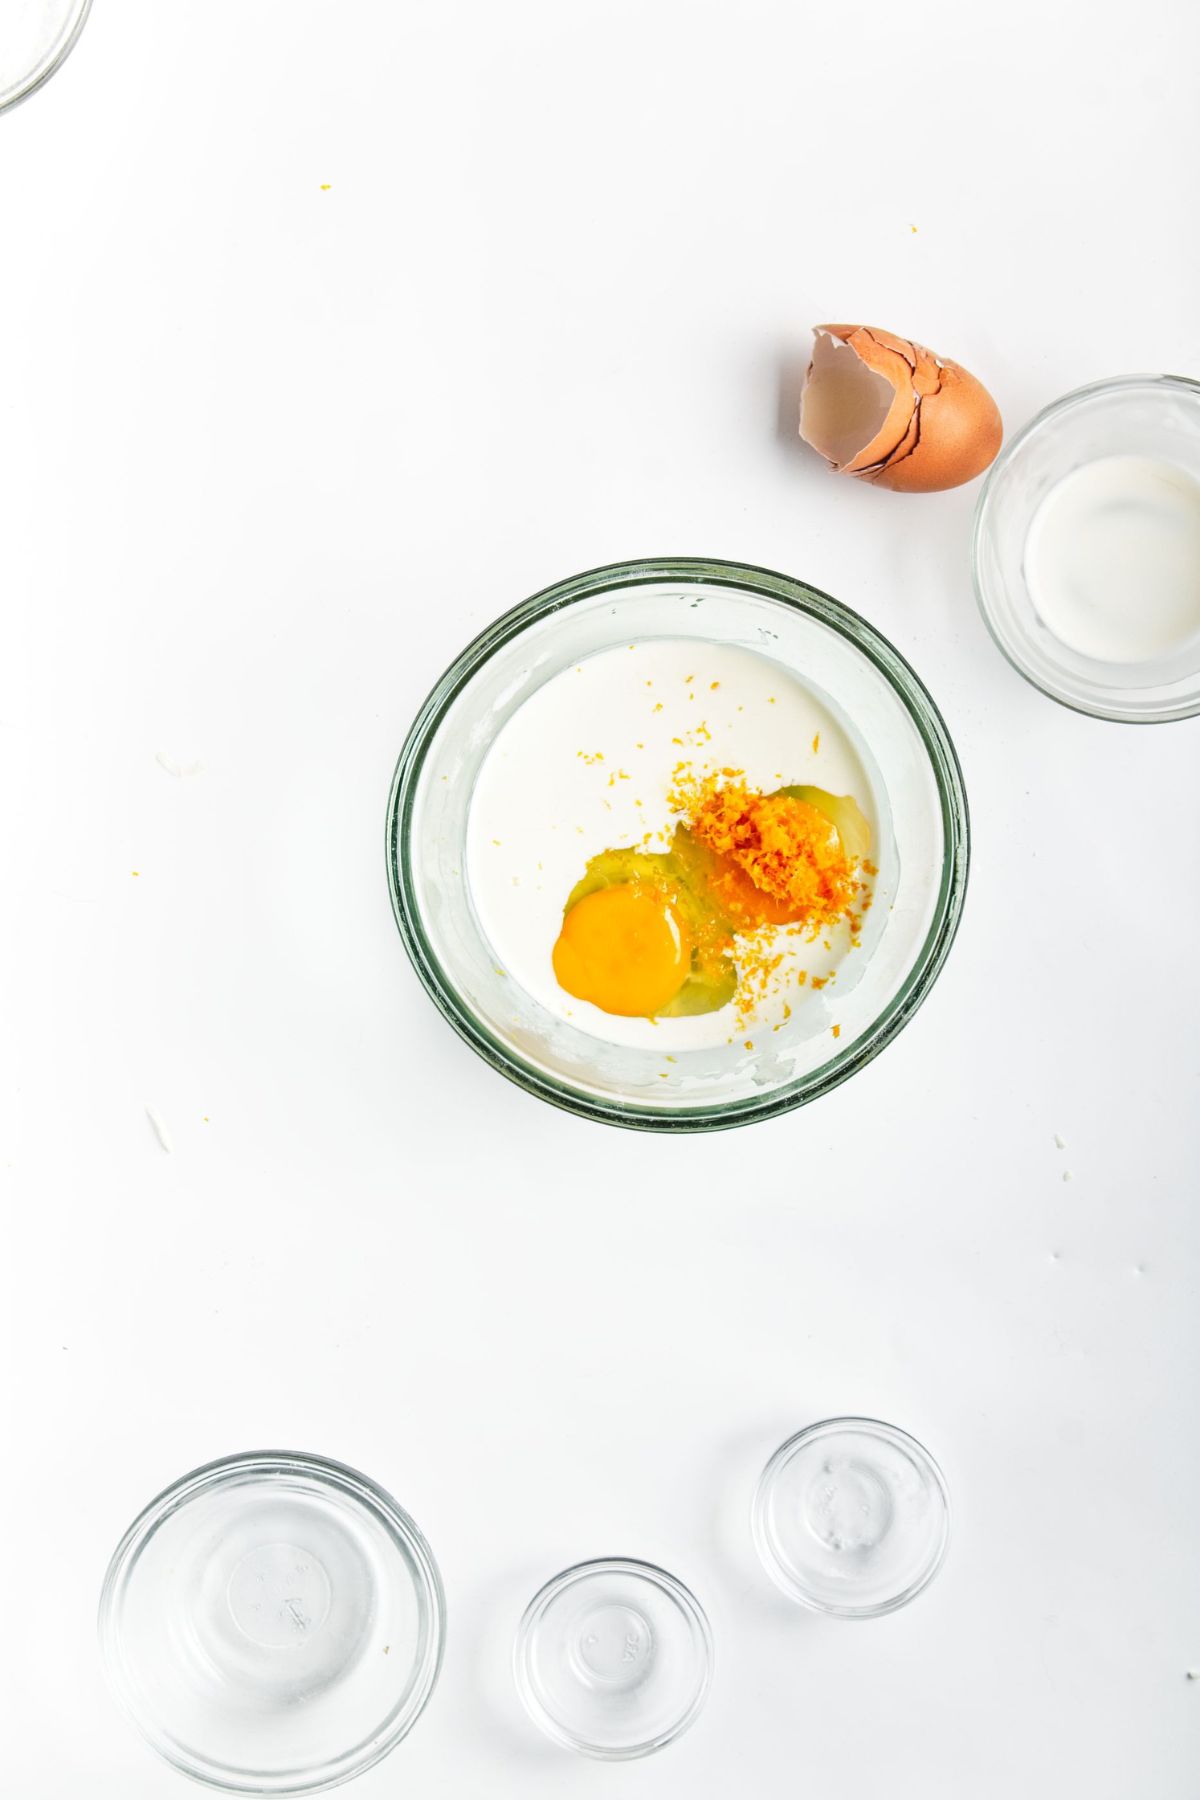 A mixing bowl with eggs, cream and orange zest.